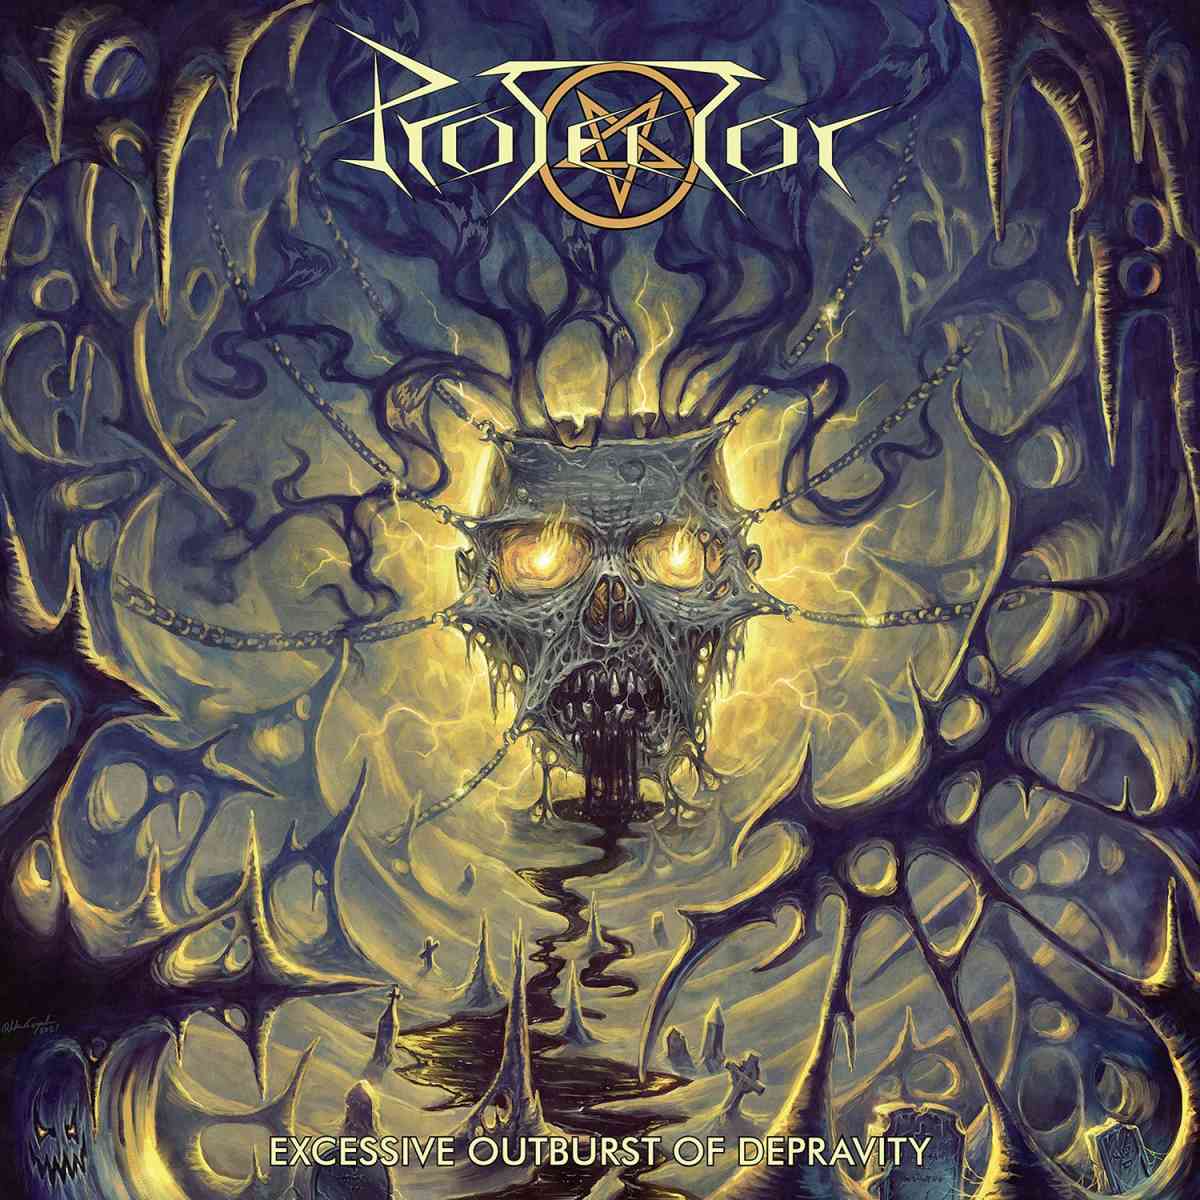 protector - Excessive Outburst of Depravity - album cover